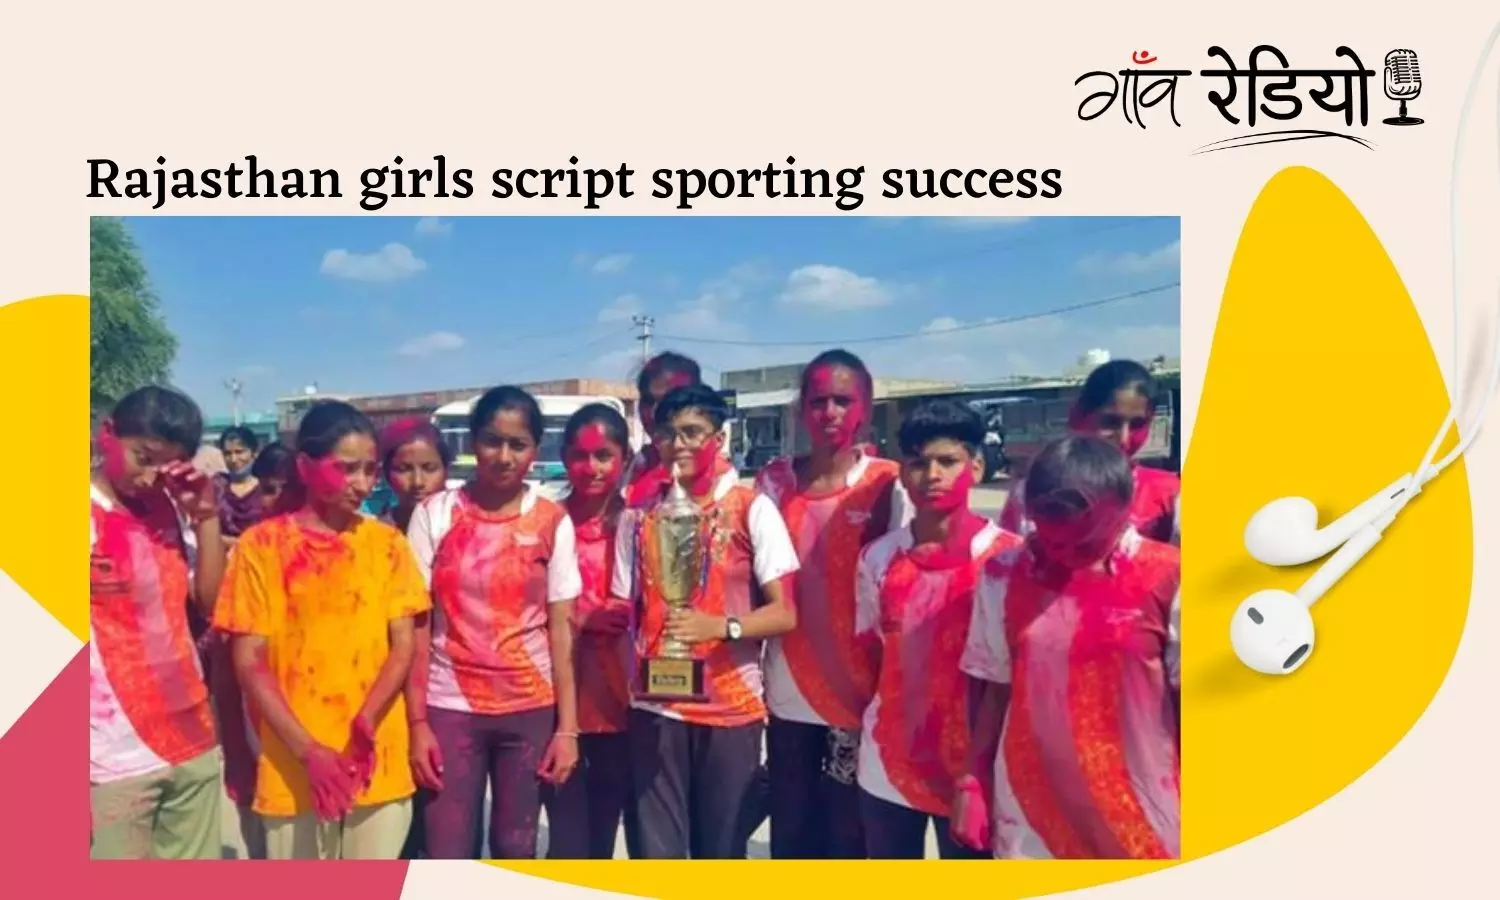 Girls from a conservative village in Rajasthan script sporting success